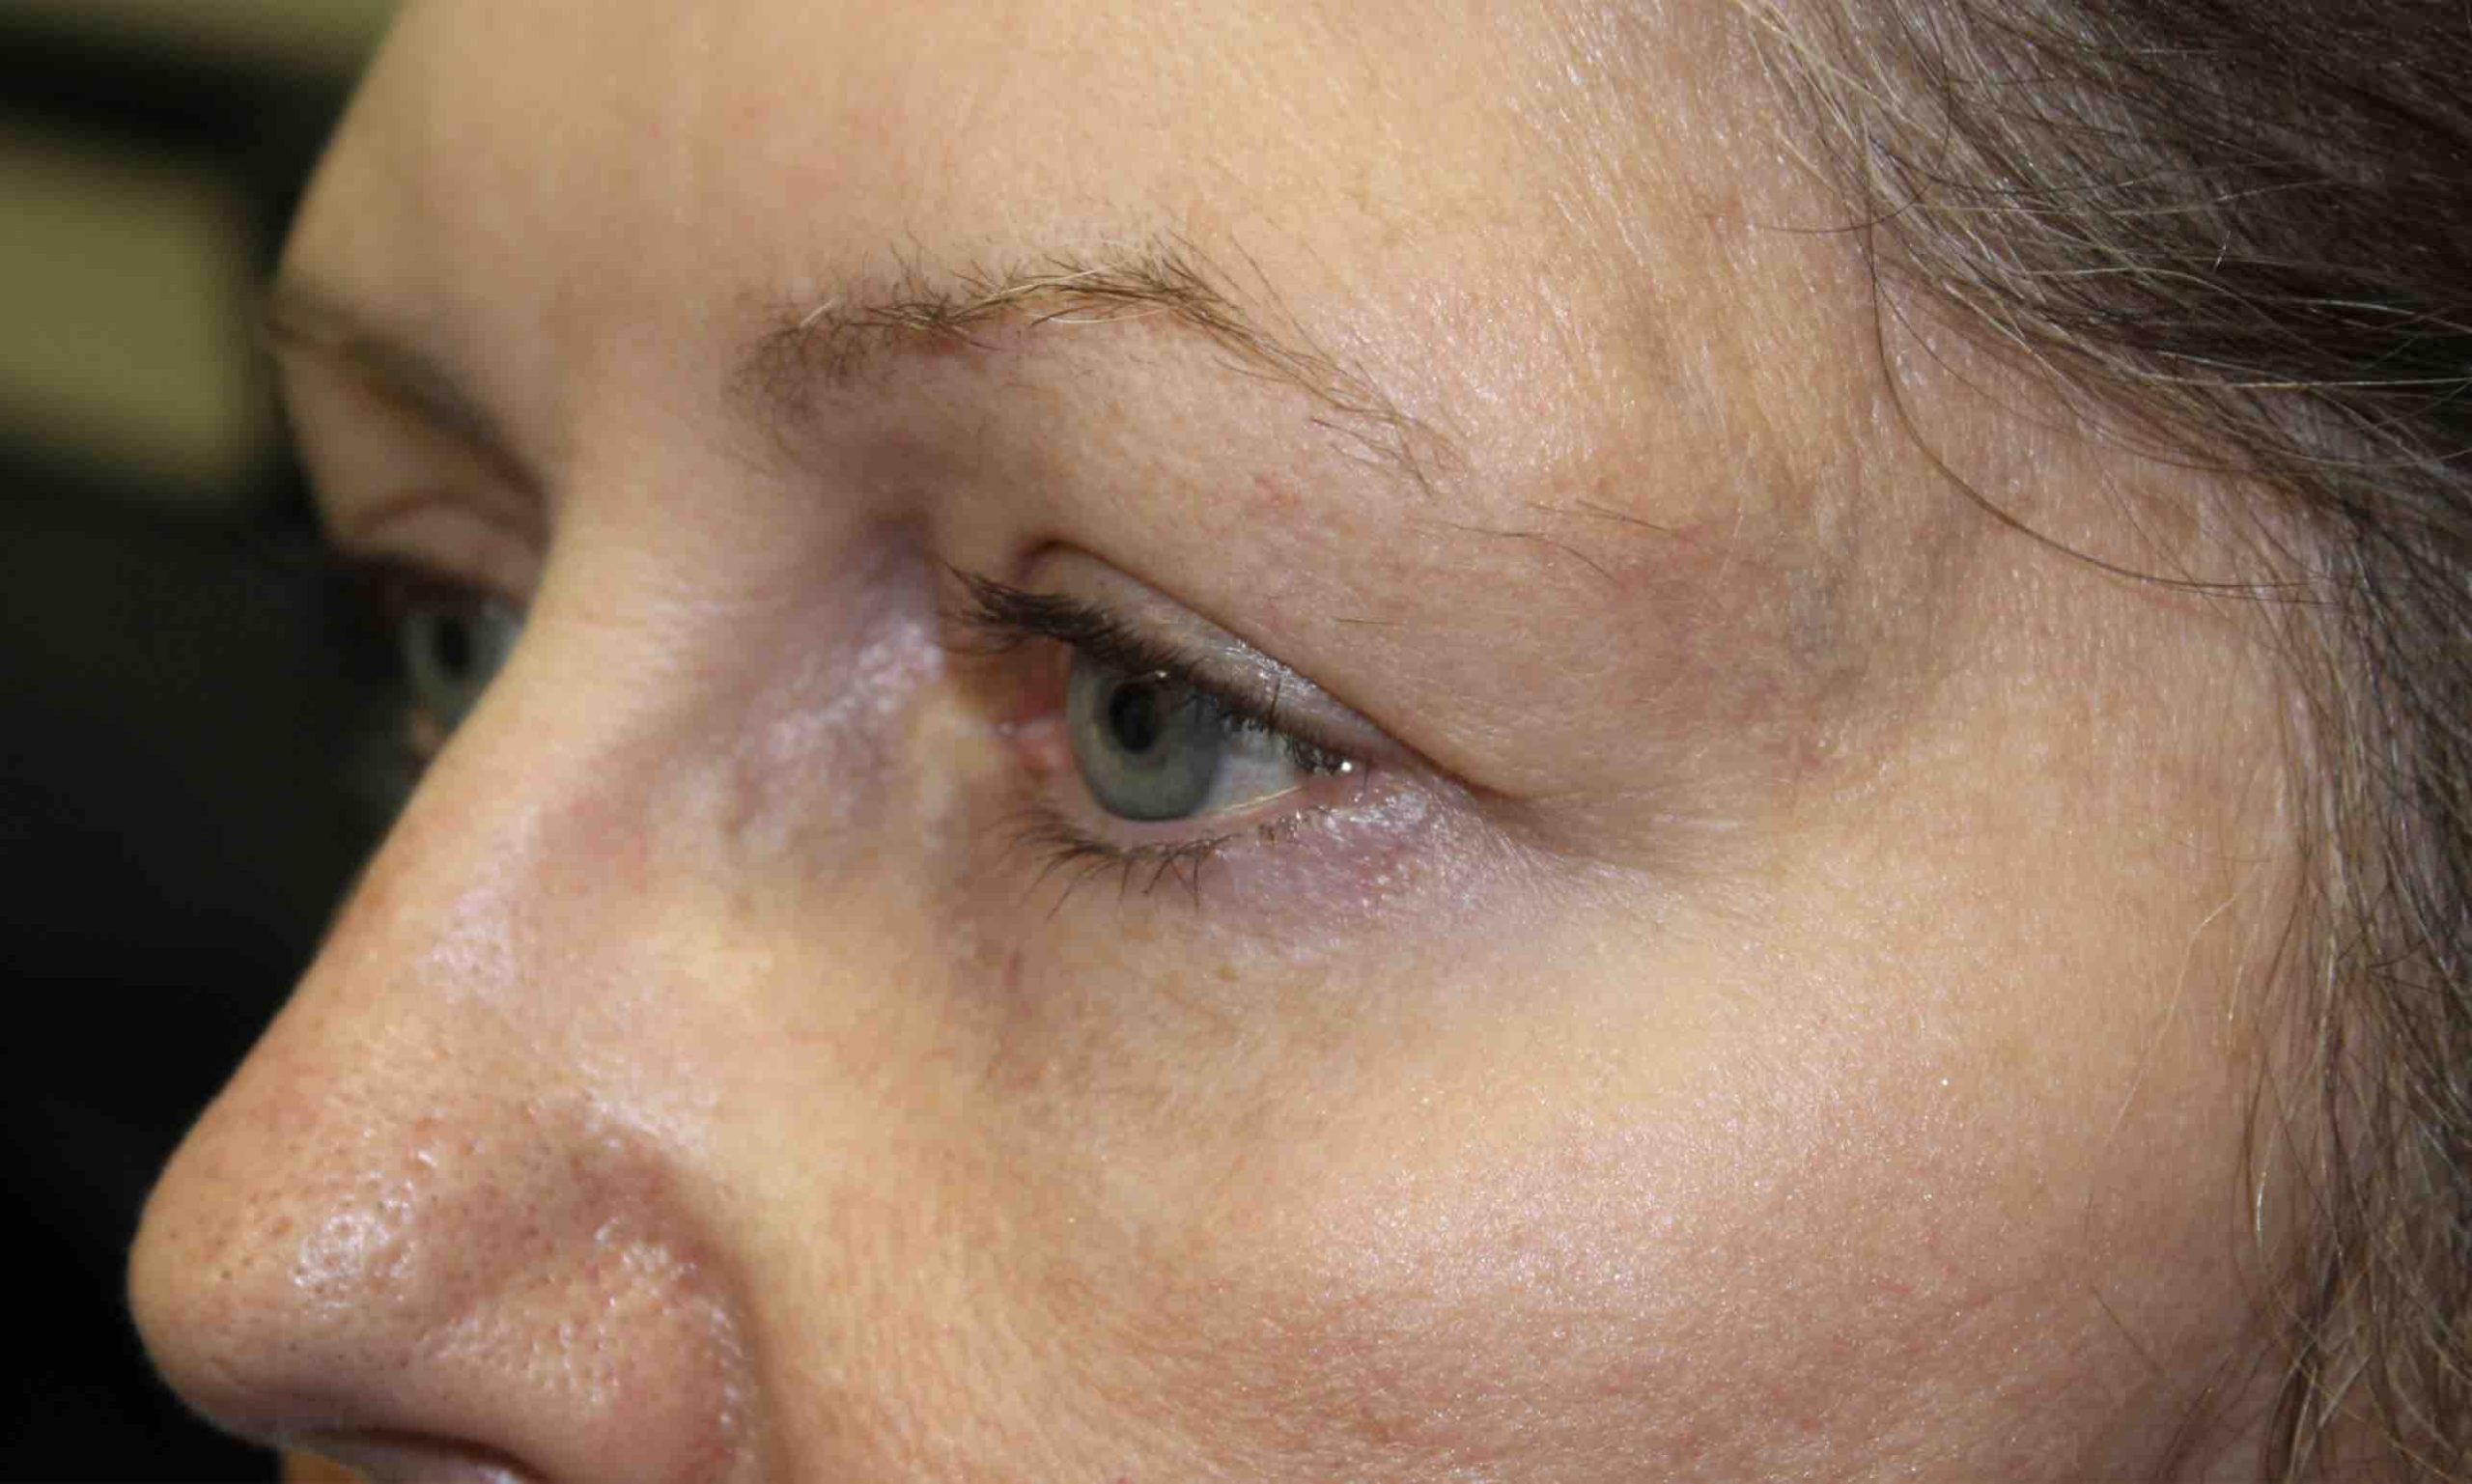 woman after upper blepharoplasty surgery on the eye